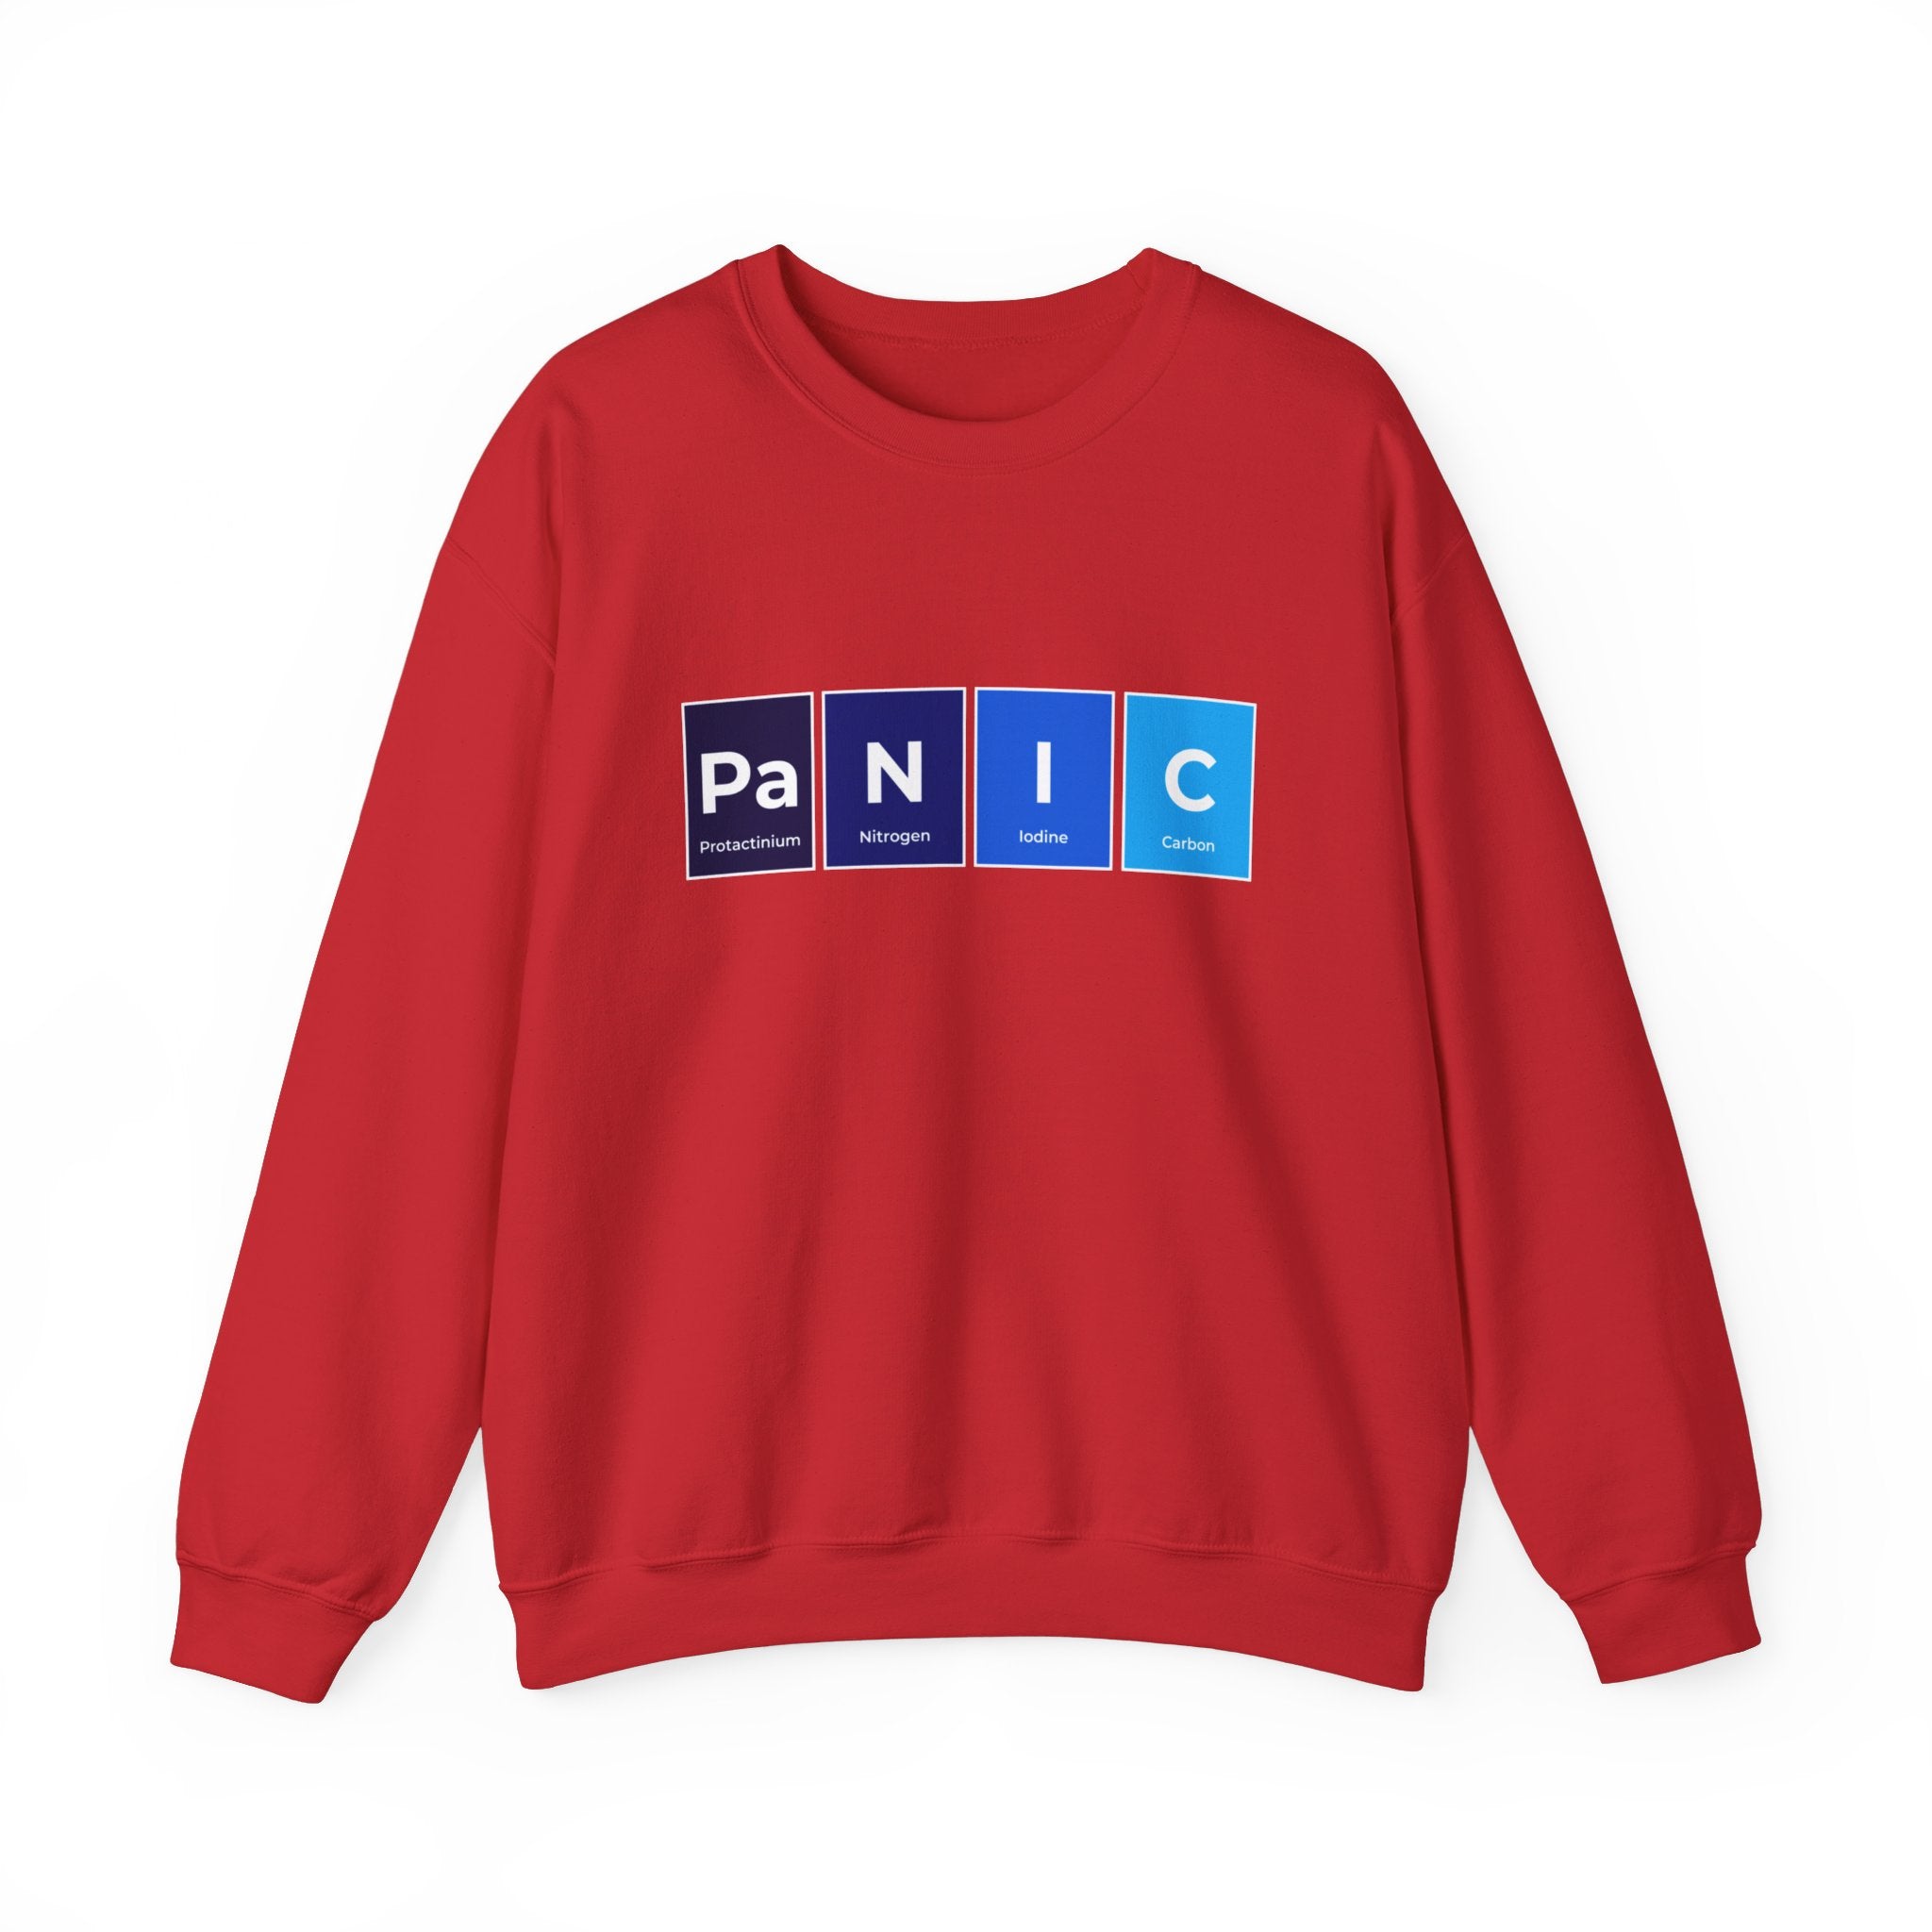 Pa-N-I-C - Sweatshirt: Cozy red sweatshirt featuring a unique Pa-N-I-C design, with the word "PANIC" spelled out using elements from the periodic table—P (Phosphorus), N (Nitrogen), I (Iodine), and C (Carbon). Perfect for staying warm during the colder months.